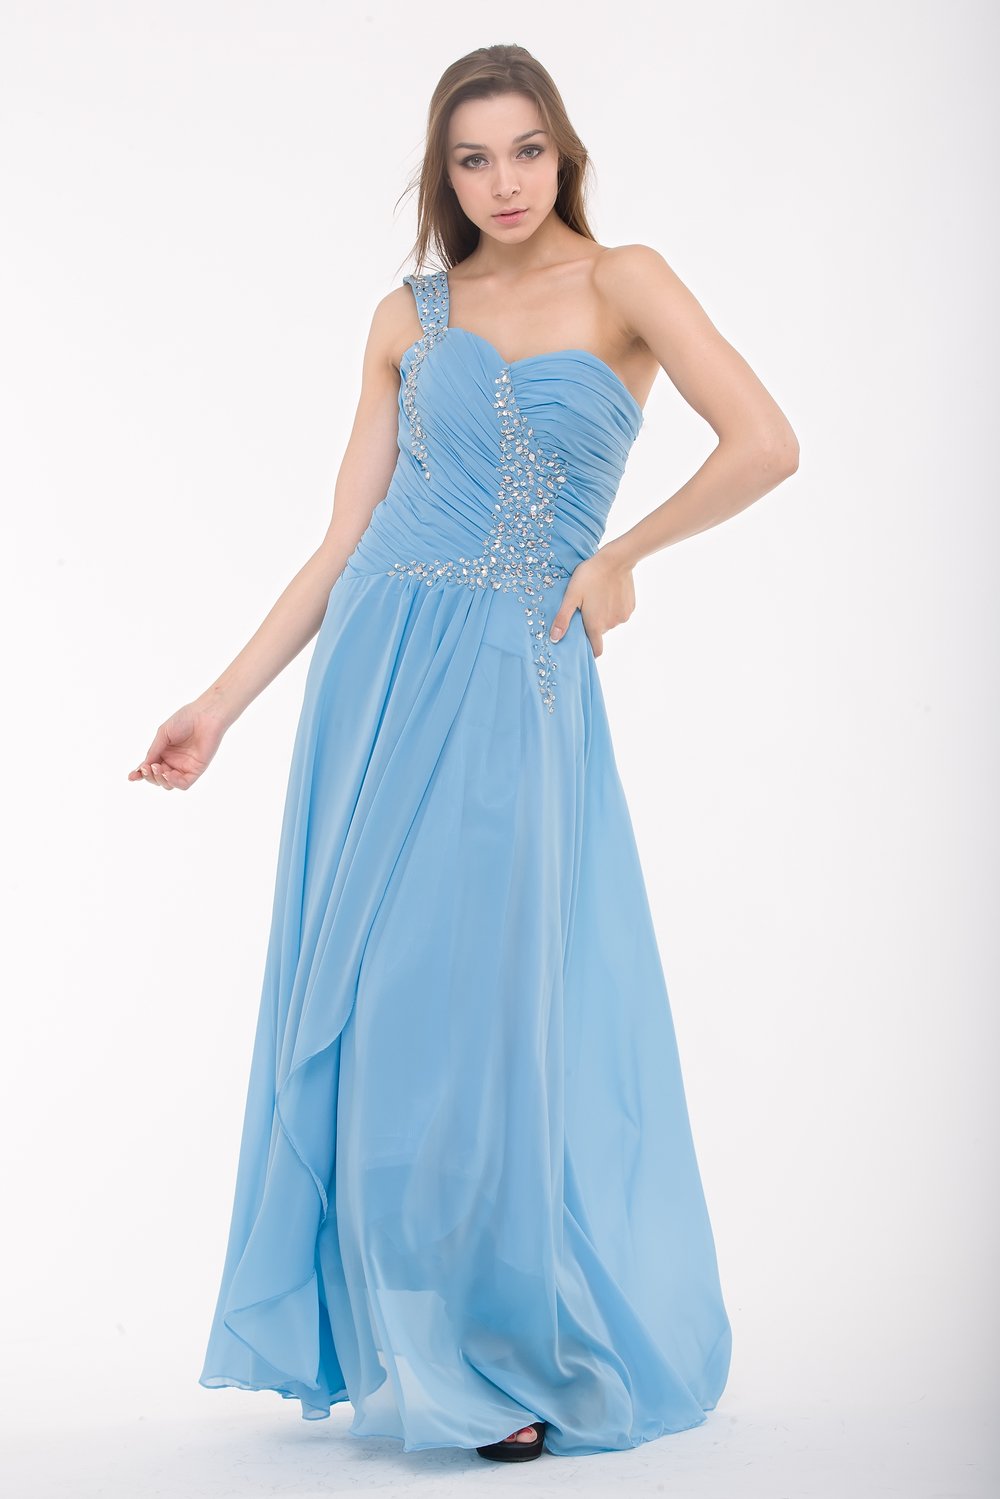 2013 NEW Women's Evening Dress One Shoulder Party Gown Prom Bridal Wedding Formal Ankle-Length Attire Blue LF094